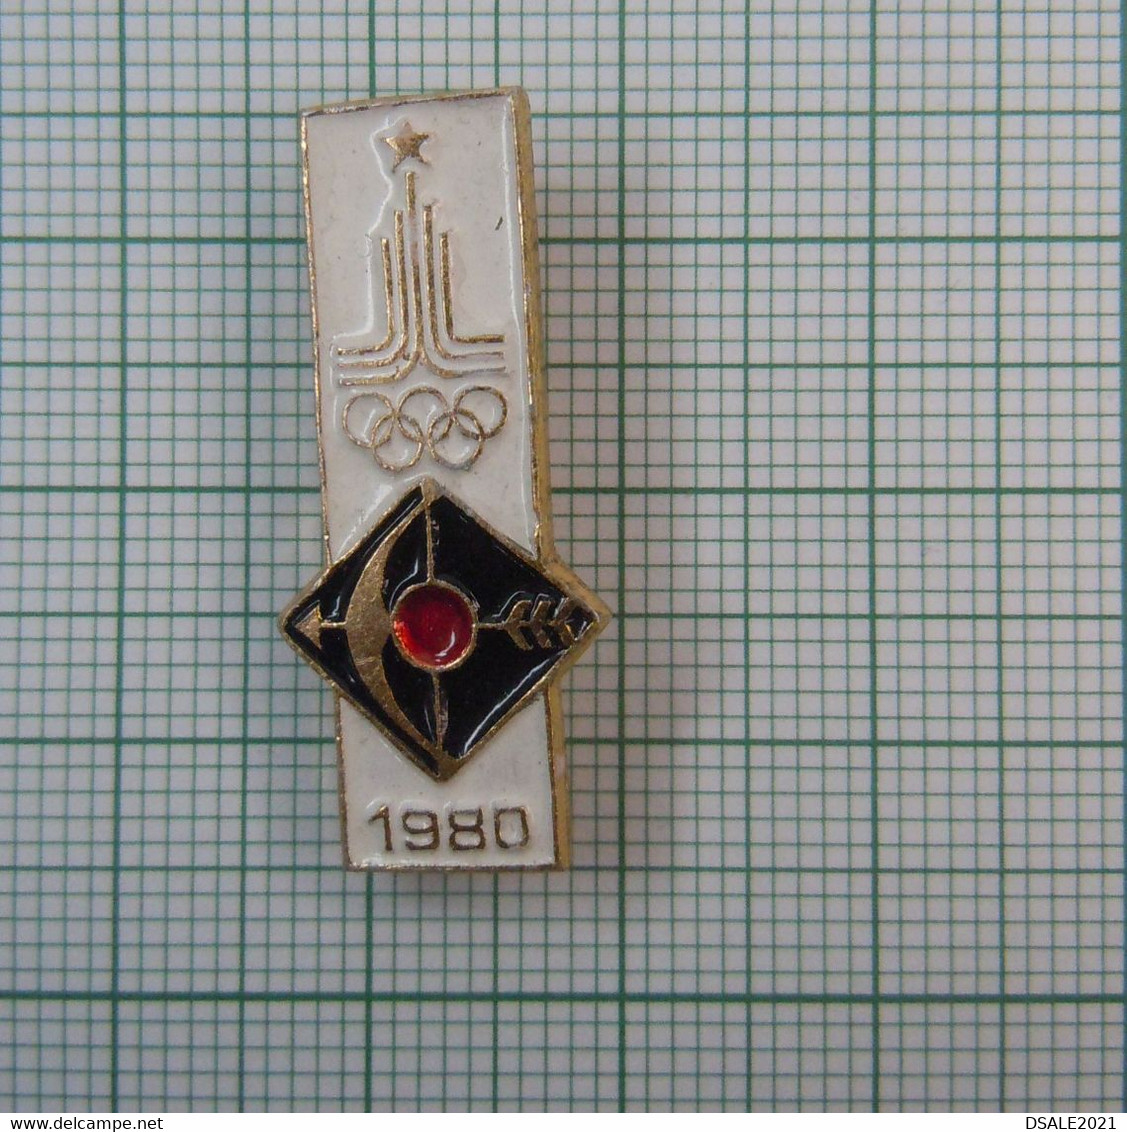 Russia USSR Russland Sowjetunion Moscow 1980 Summer Olympic Archery Sport Mascot Vintage Pin Badge (m984) - Tiro Al Arco